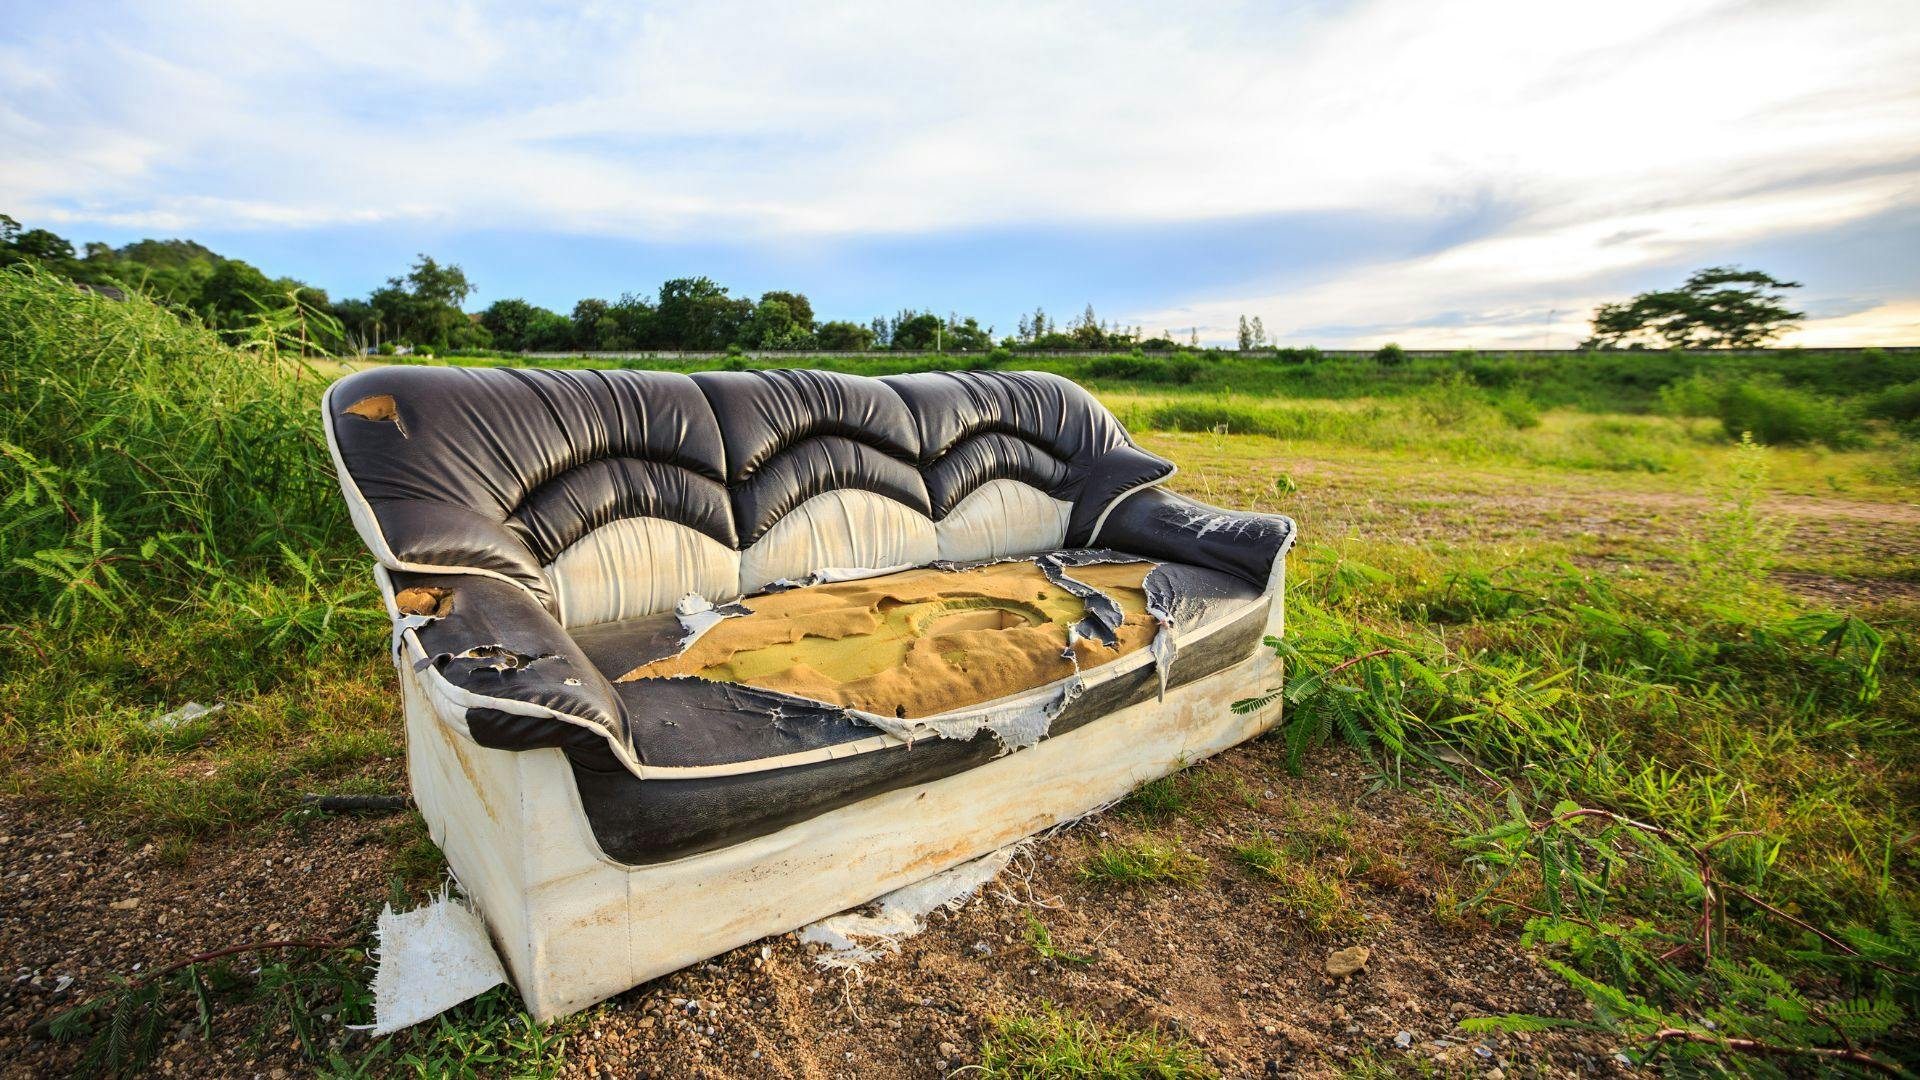 How & Where to Get Rid of Old Sofas in Malaysia 